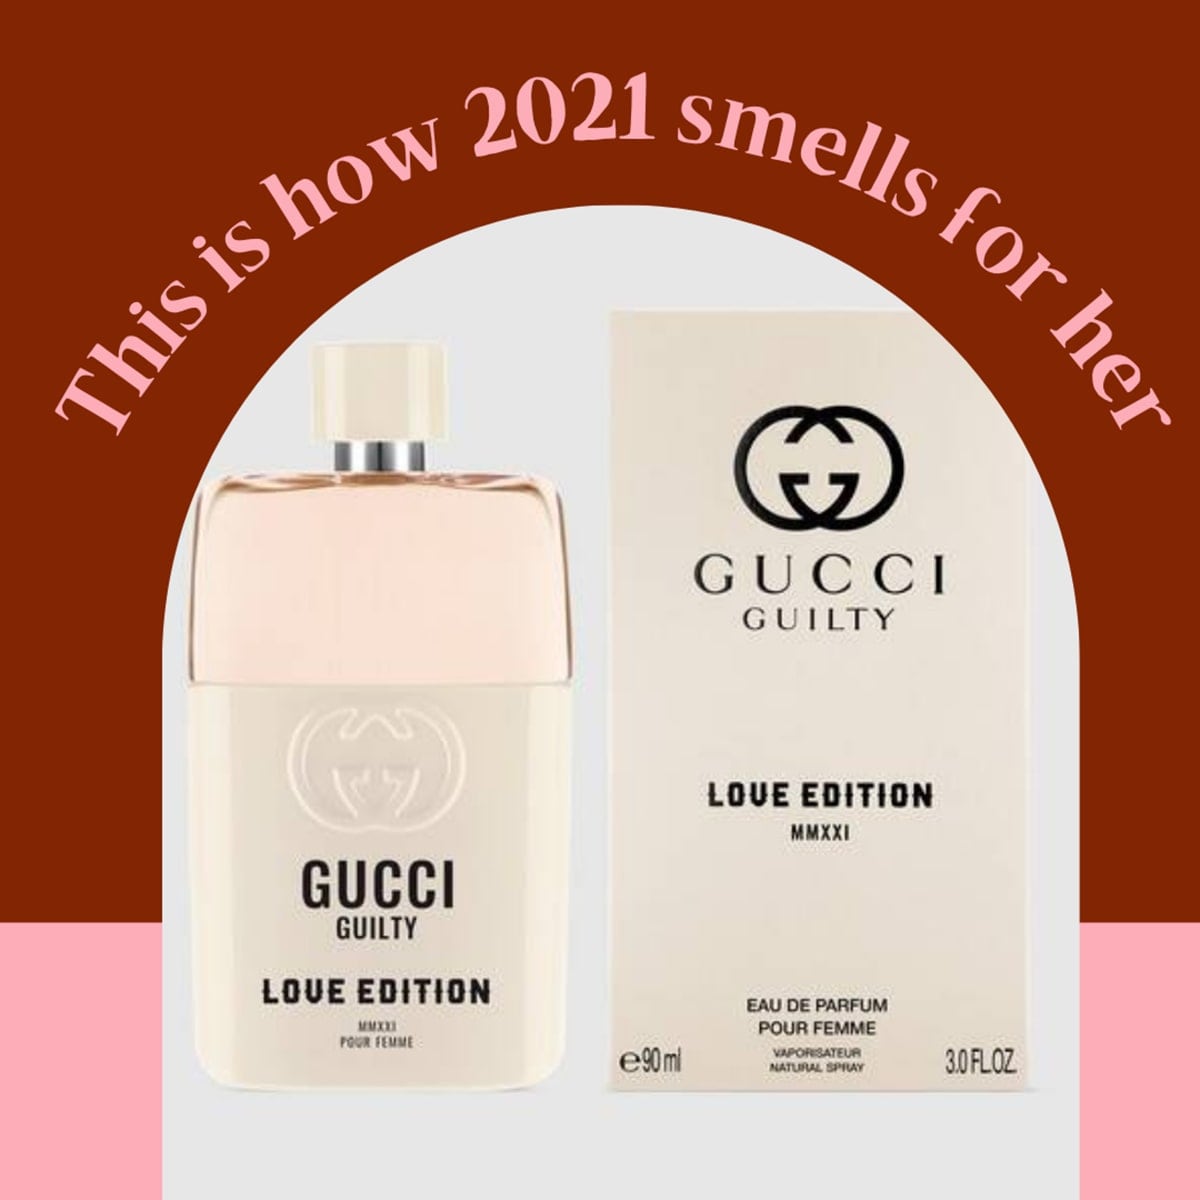 This is how 2021 smells for her: New fragrances you might want to try in 2021